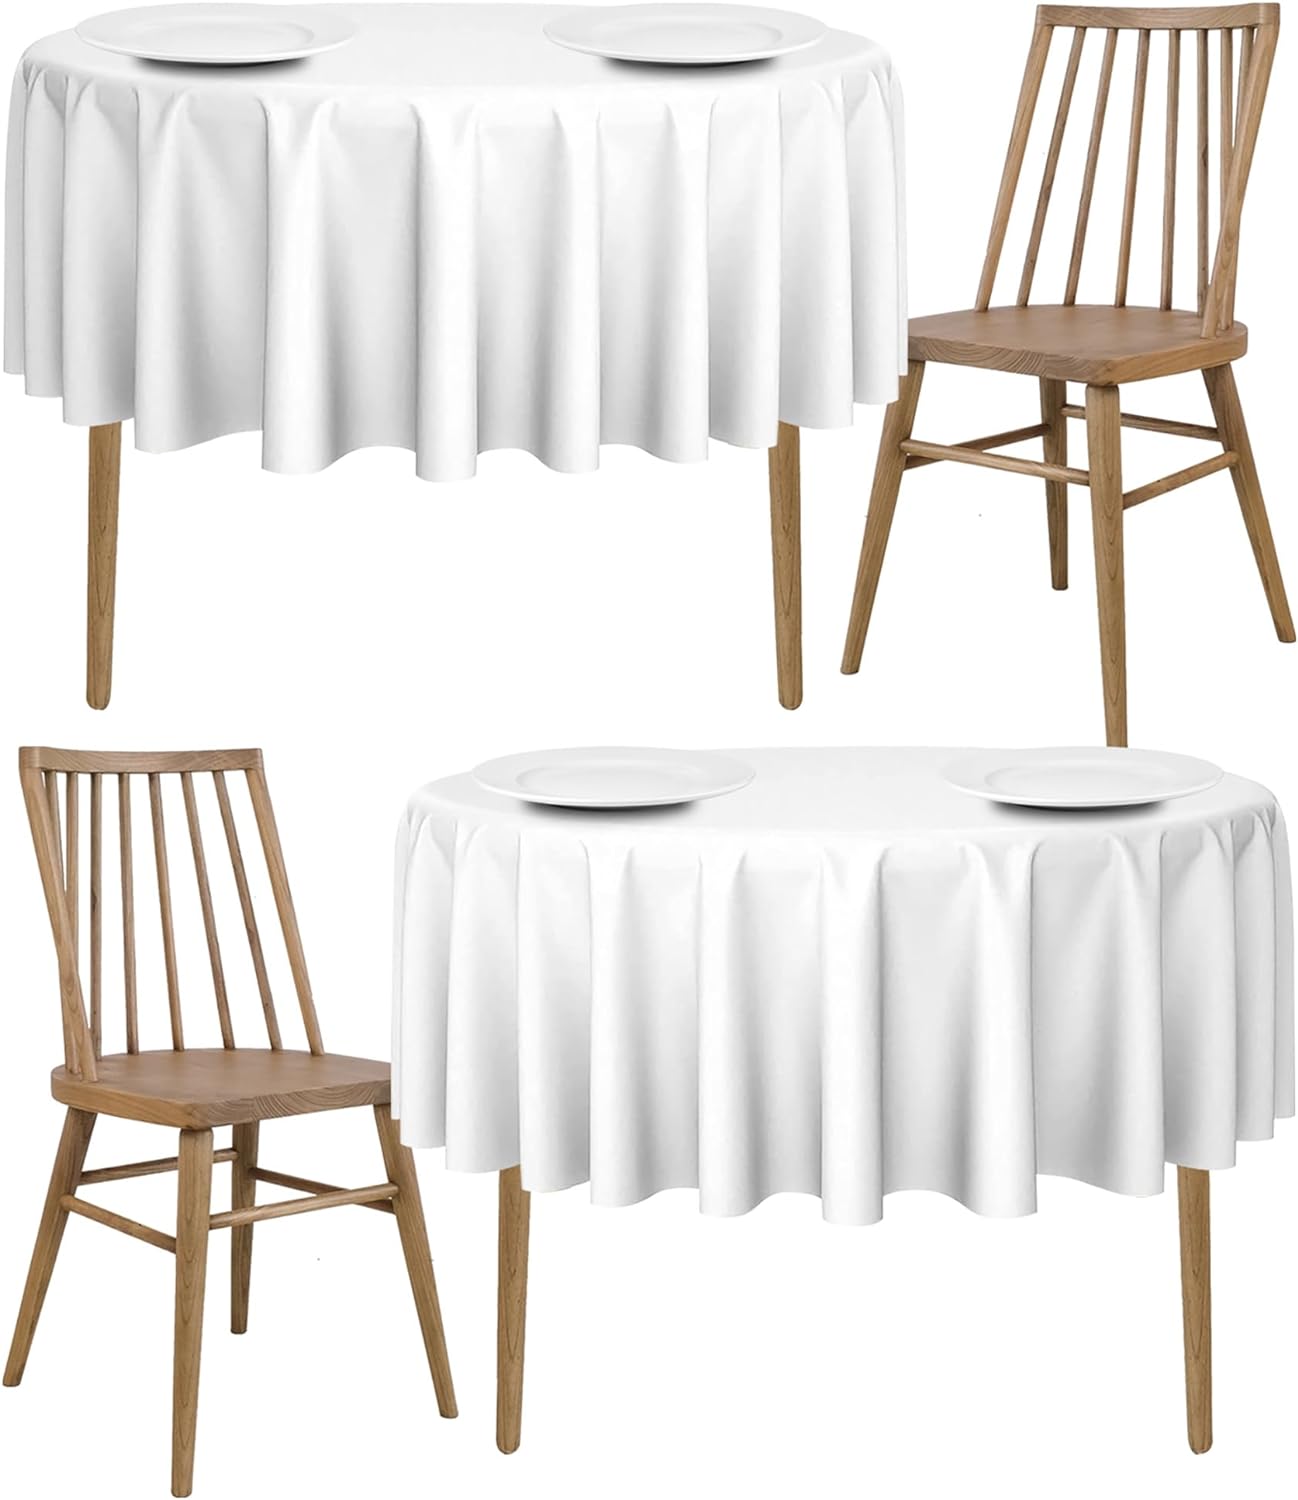 These table cloths are great ! They are restaurant quality ! I was so pleased when I got these, that we bought more in a different size for the rectangle tables. They cleaned up beautifully after the party as well. I used them on a 40 inch table and they fell right to the floor, which is what I wanted ! Will definitely recommend these to others.